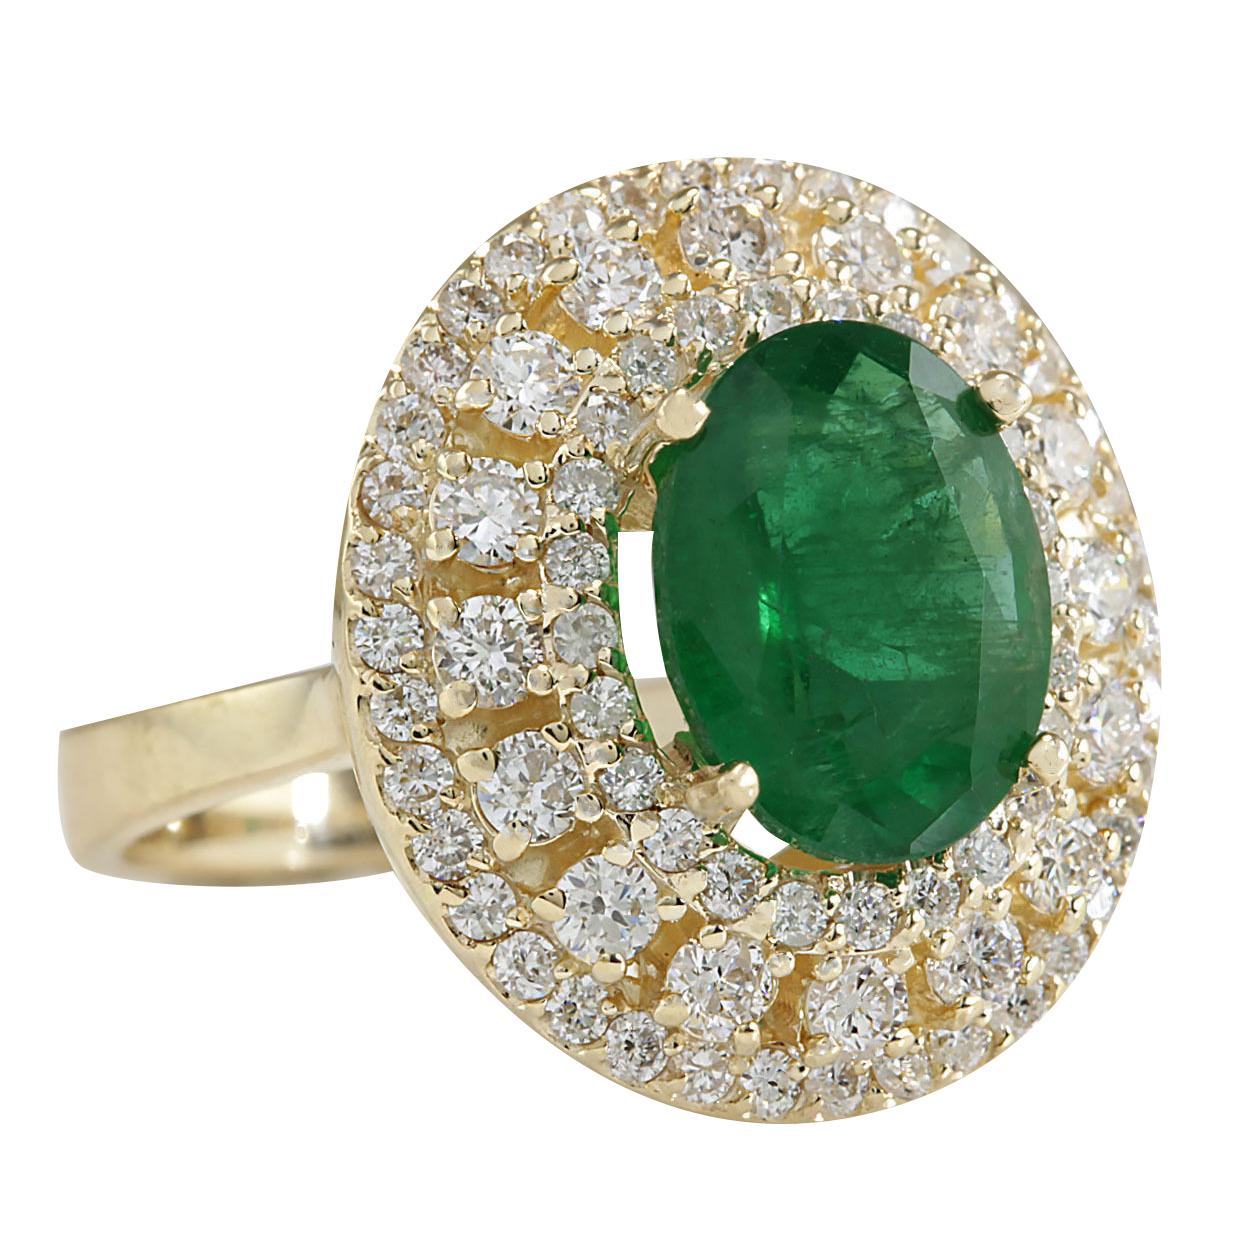 Stamped: 14K Yellow Gold
Total Ring Weight: 8.5 Grams
Total Natural Emerald Weight is 3.16 Carat (Measures: 10.00x8.00 mm)
Color: Green
Total Natural Diamond Weight is 1.50 Carat
Color: F-G, Clarity: VS2-SI1
Face Measures: 19.85x17.85 mm
Sku: